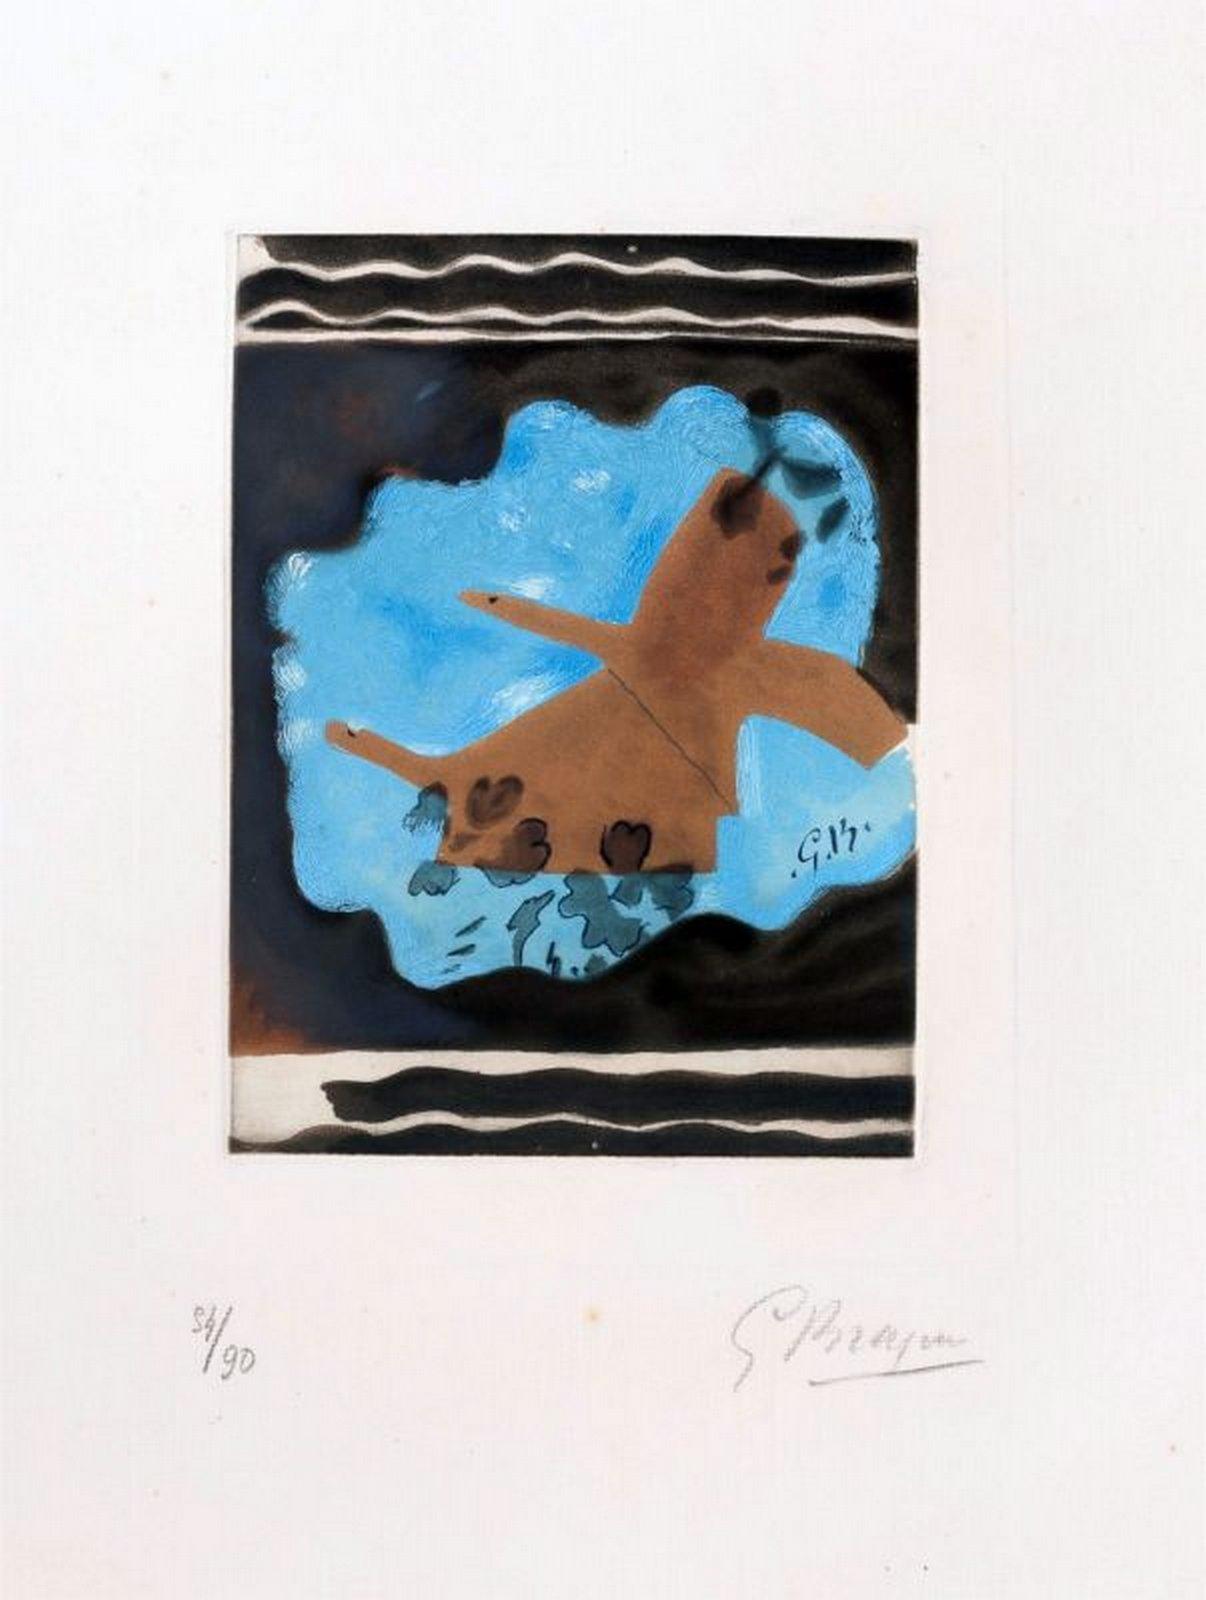 George Braque Abstract Print - Migration 